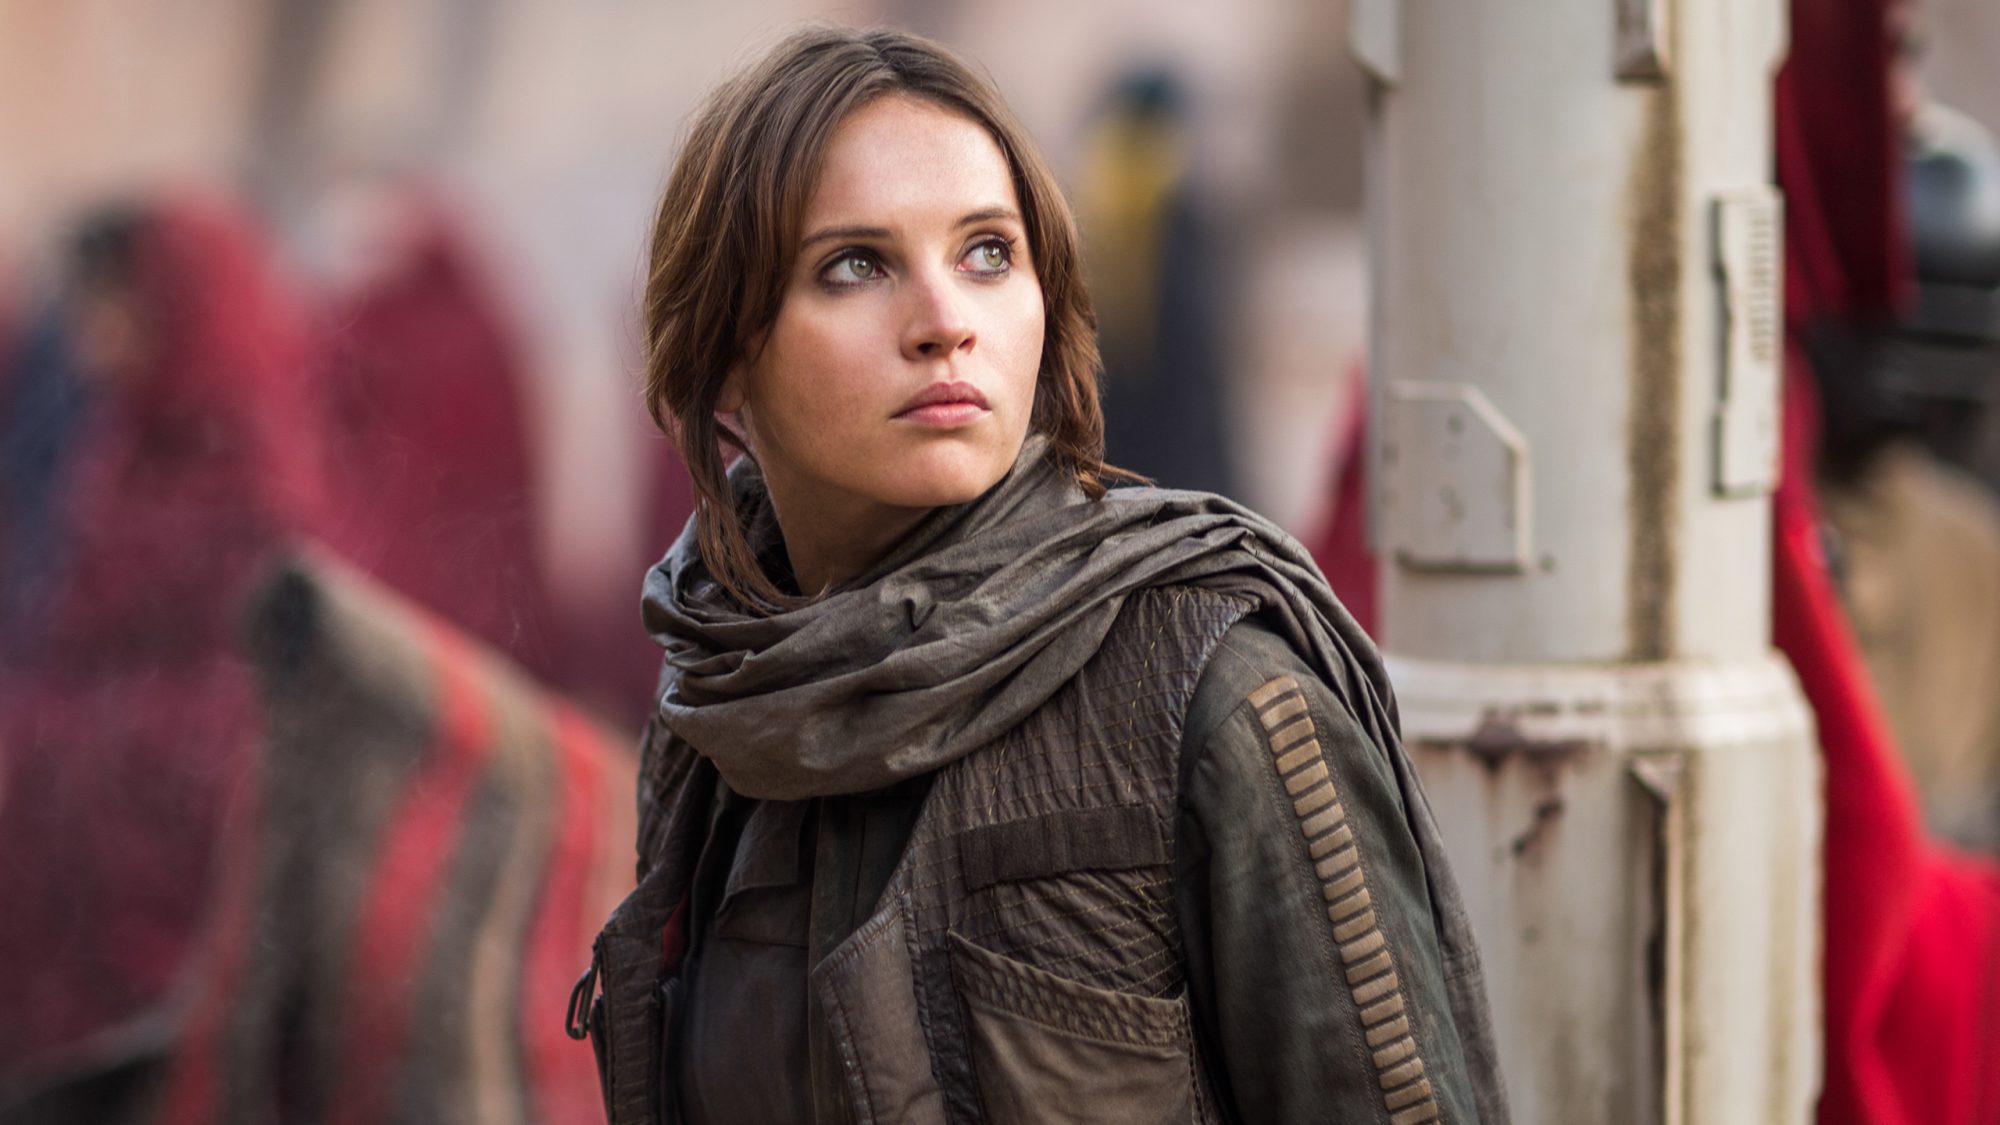 https://hellogiggles.com/wp-content/uploads/sites/7/2017/03/14/felicity-jones-as-jyn-erso-in-rogue-one-star-wars-qu-2000.jpg?quality=82&strip=all